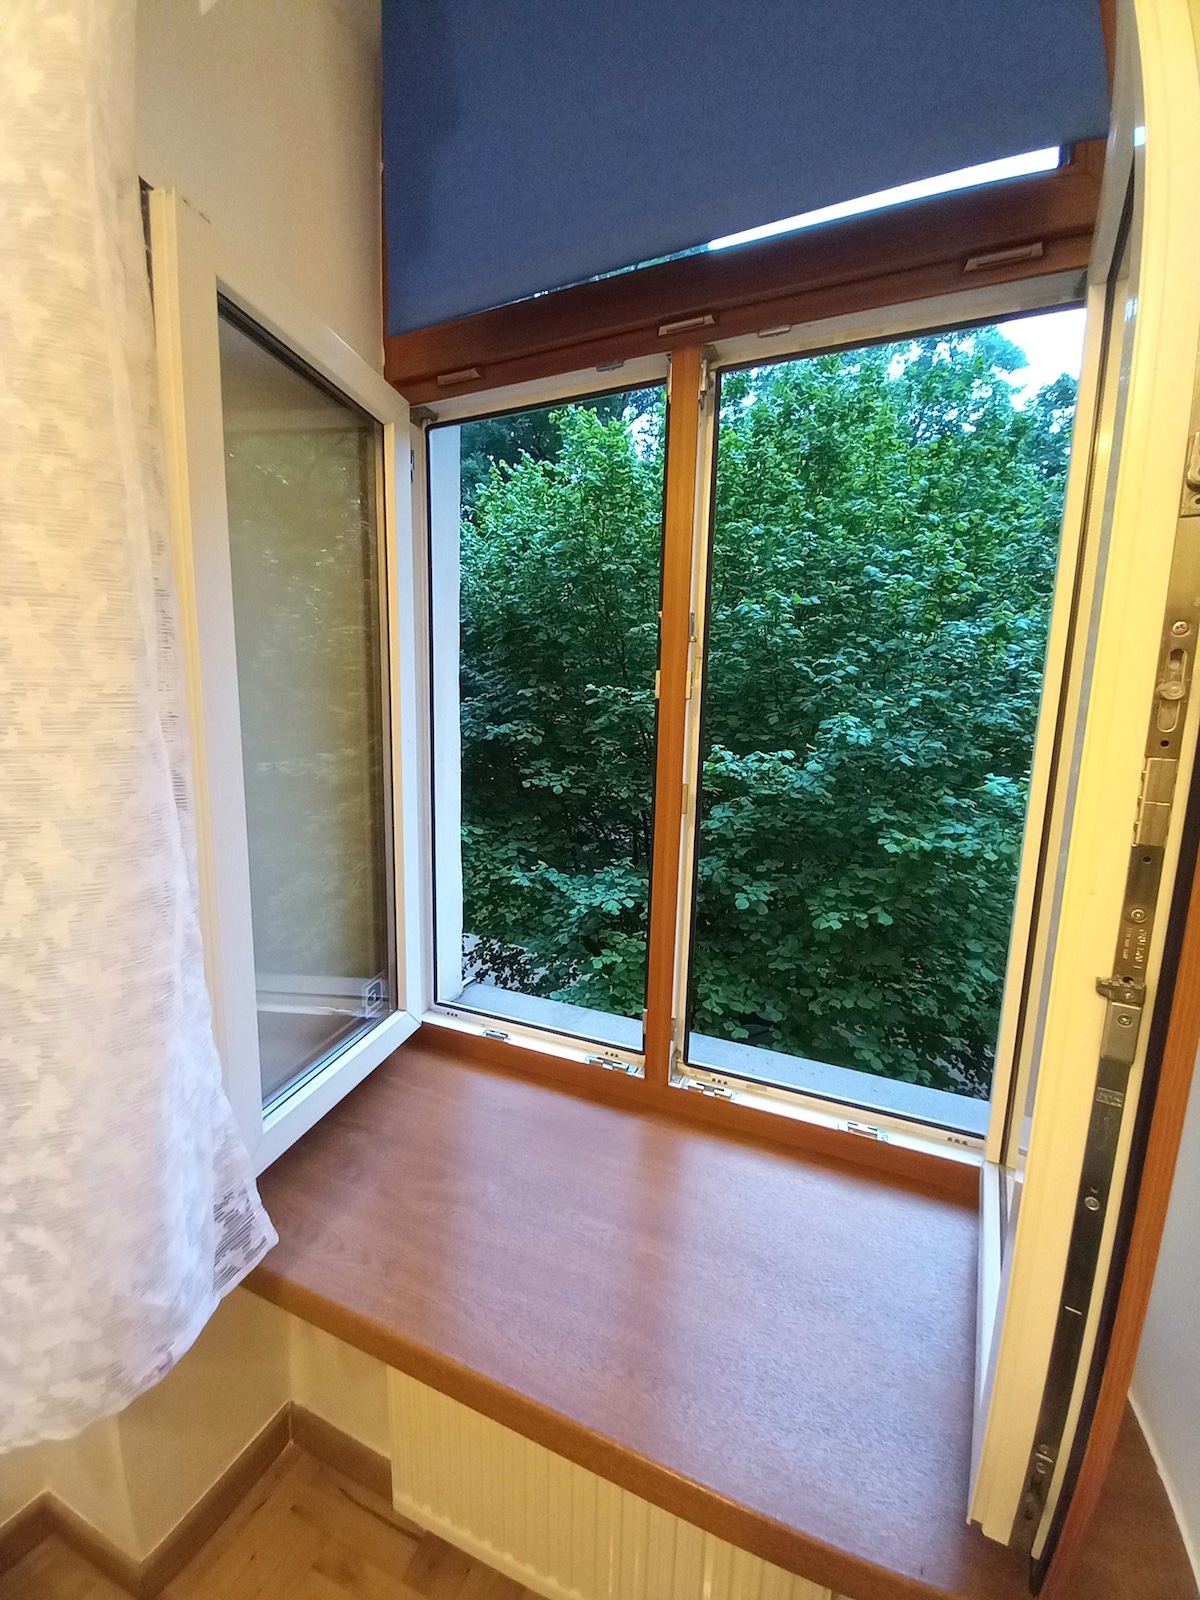 FULL Apartment for max 4 person, 3 separated rooms